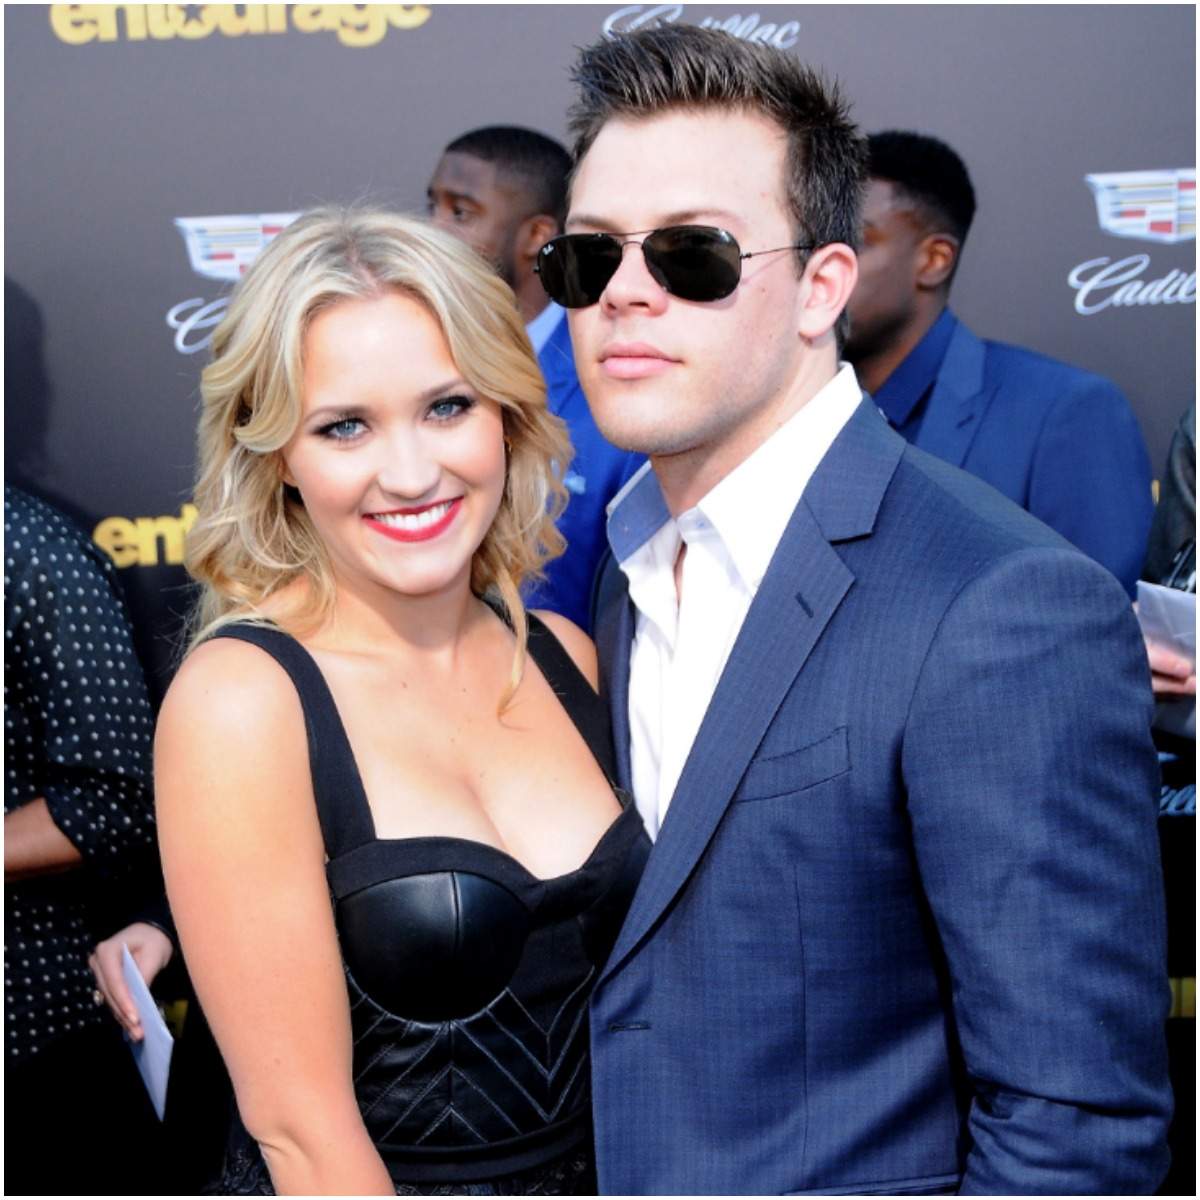 Jimmy Tatro and his girlfriend Emily Osment